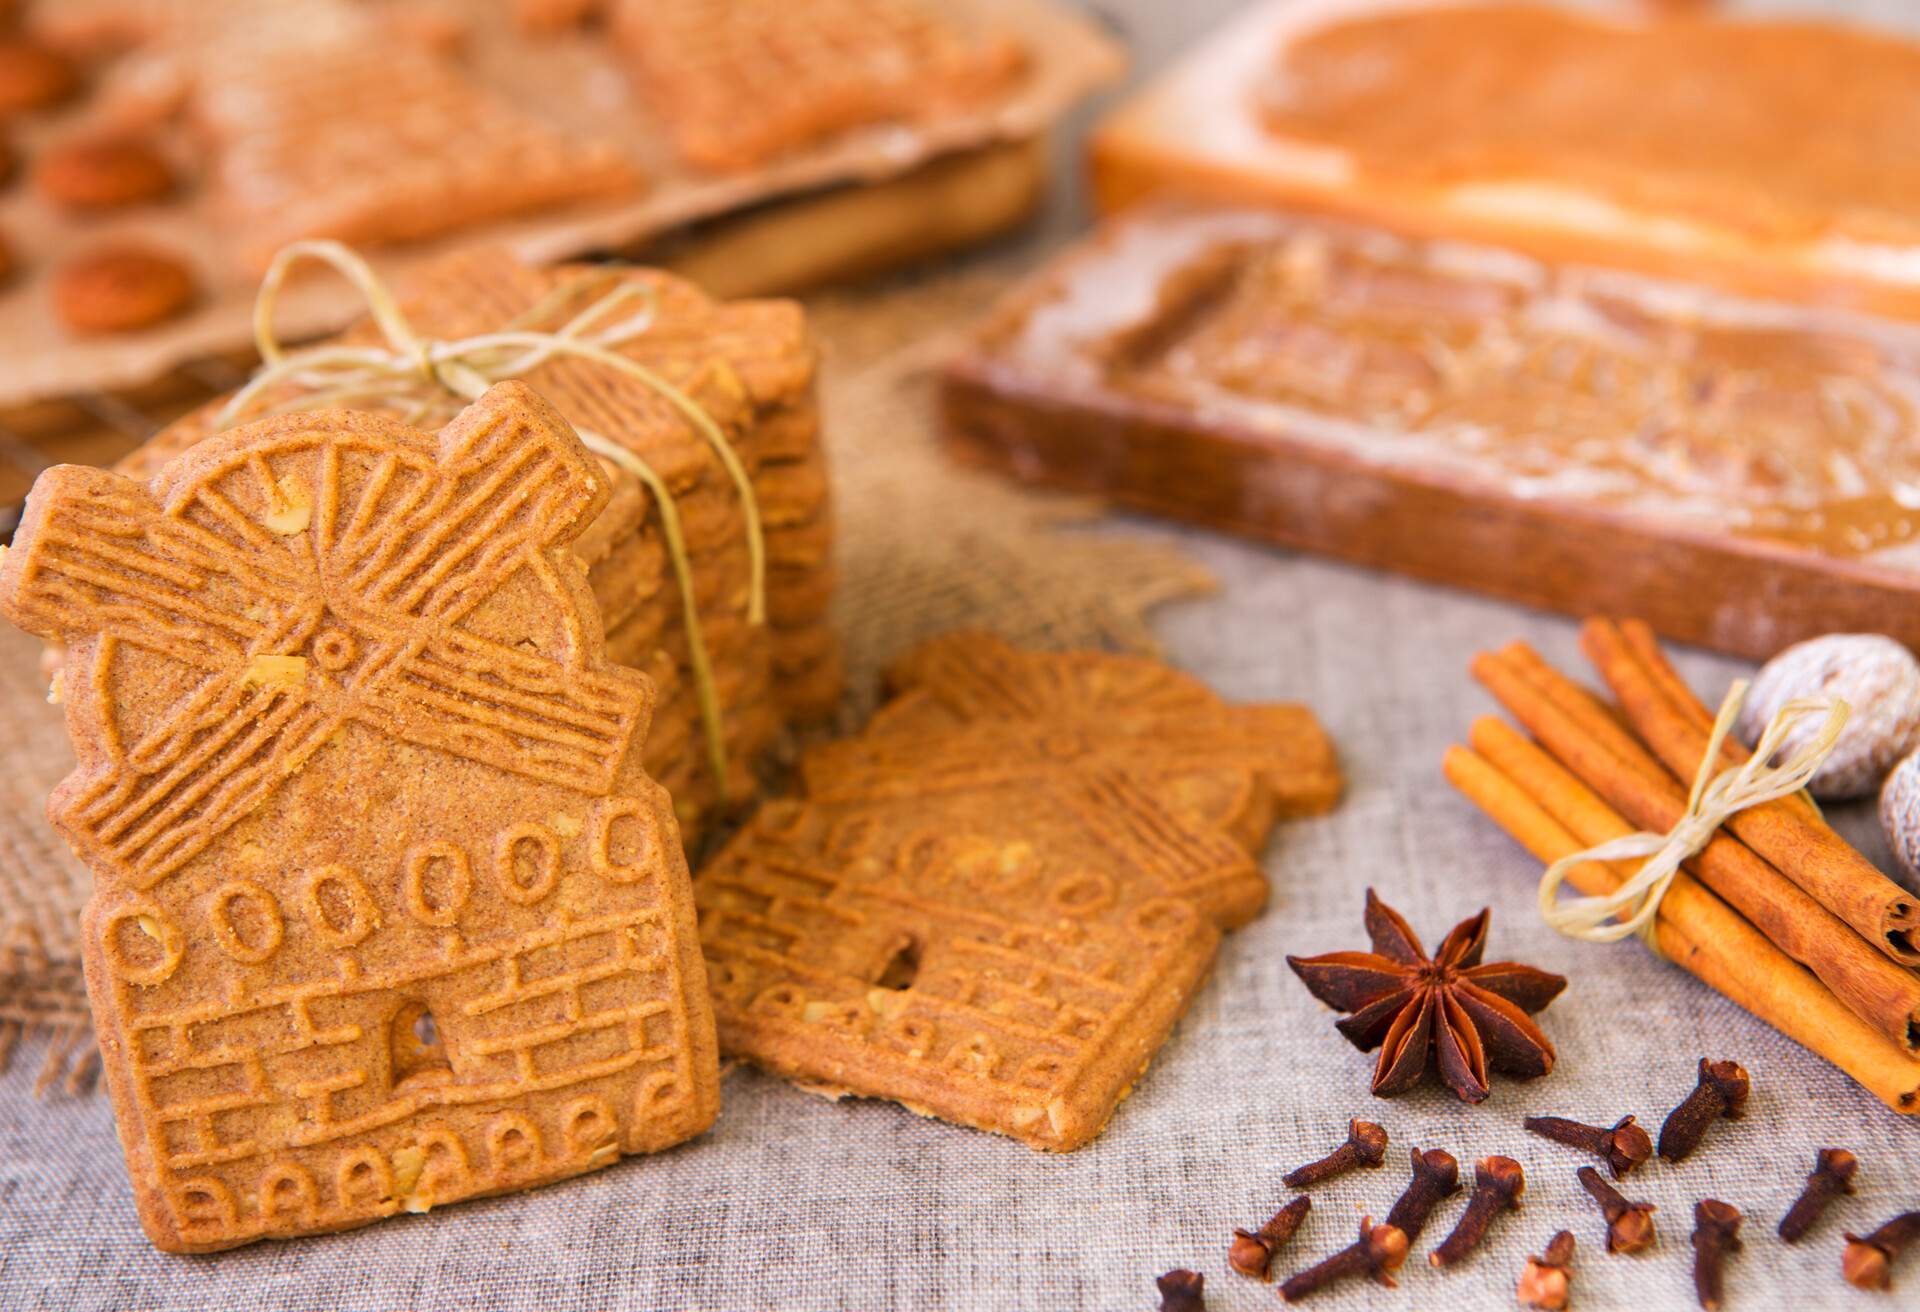 Traditional Dutch 'speculaas' (spiced shortcrust cookies). With authentic wooden cookie cutters especially made for these cookies in the background.